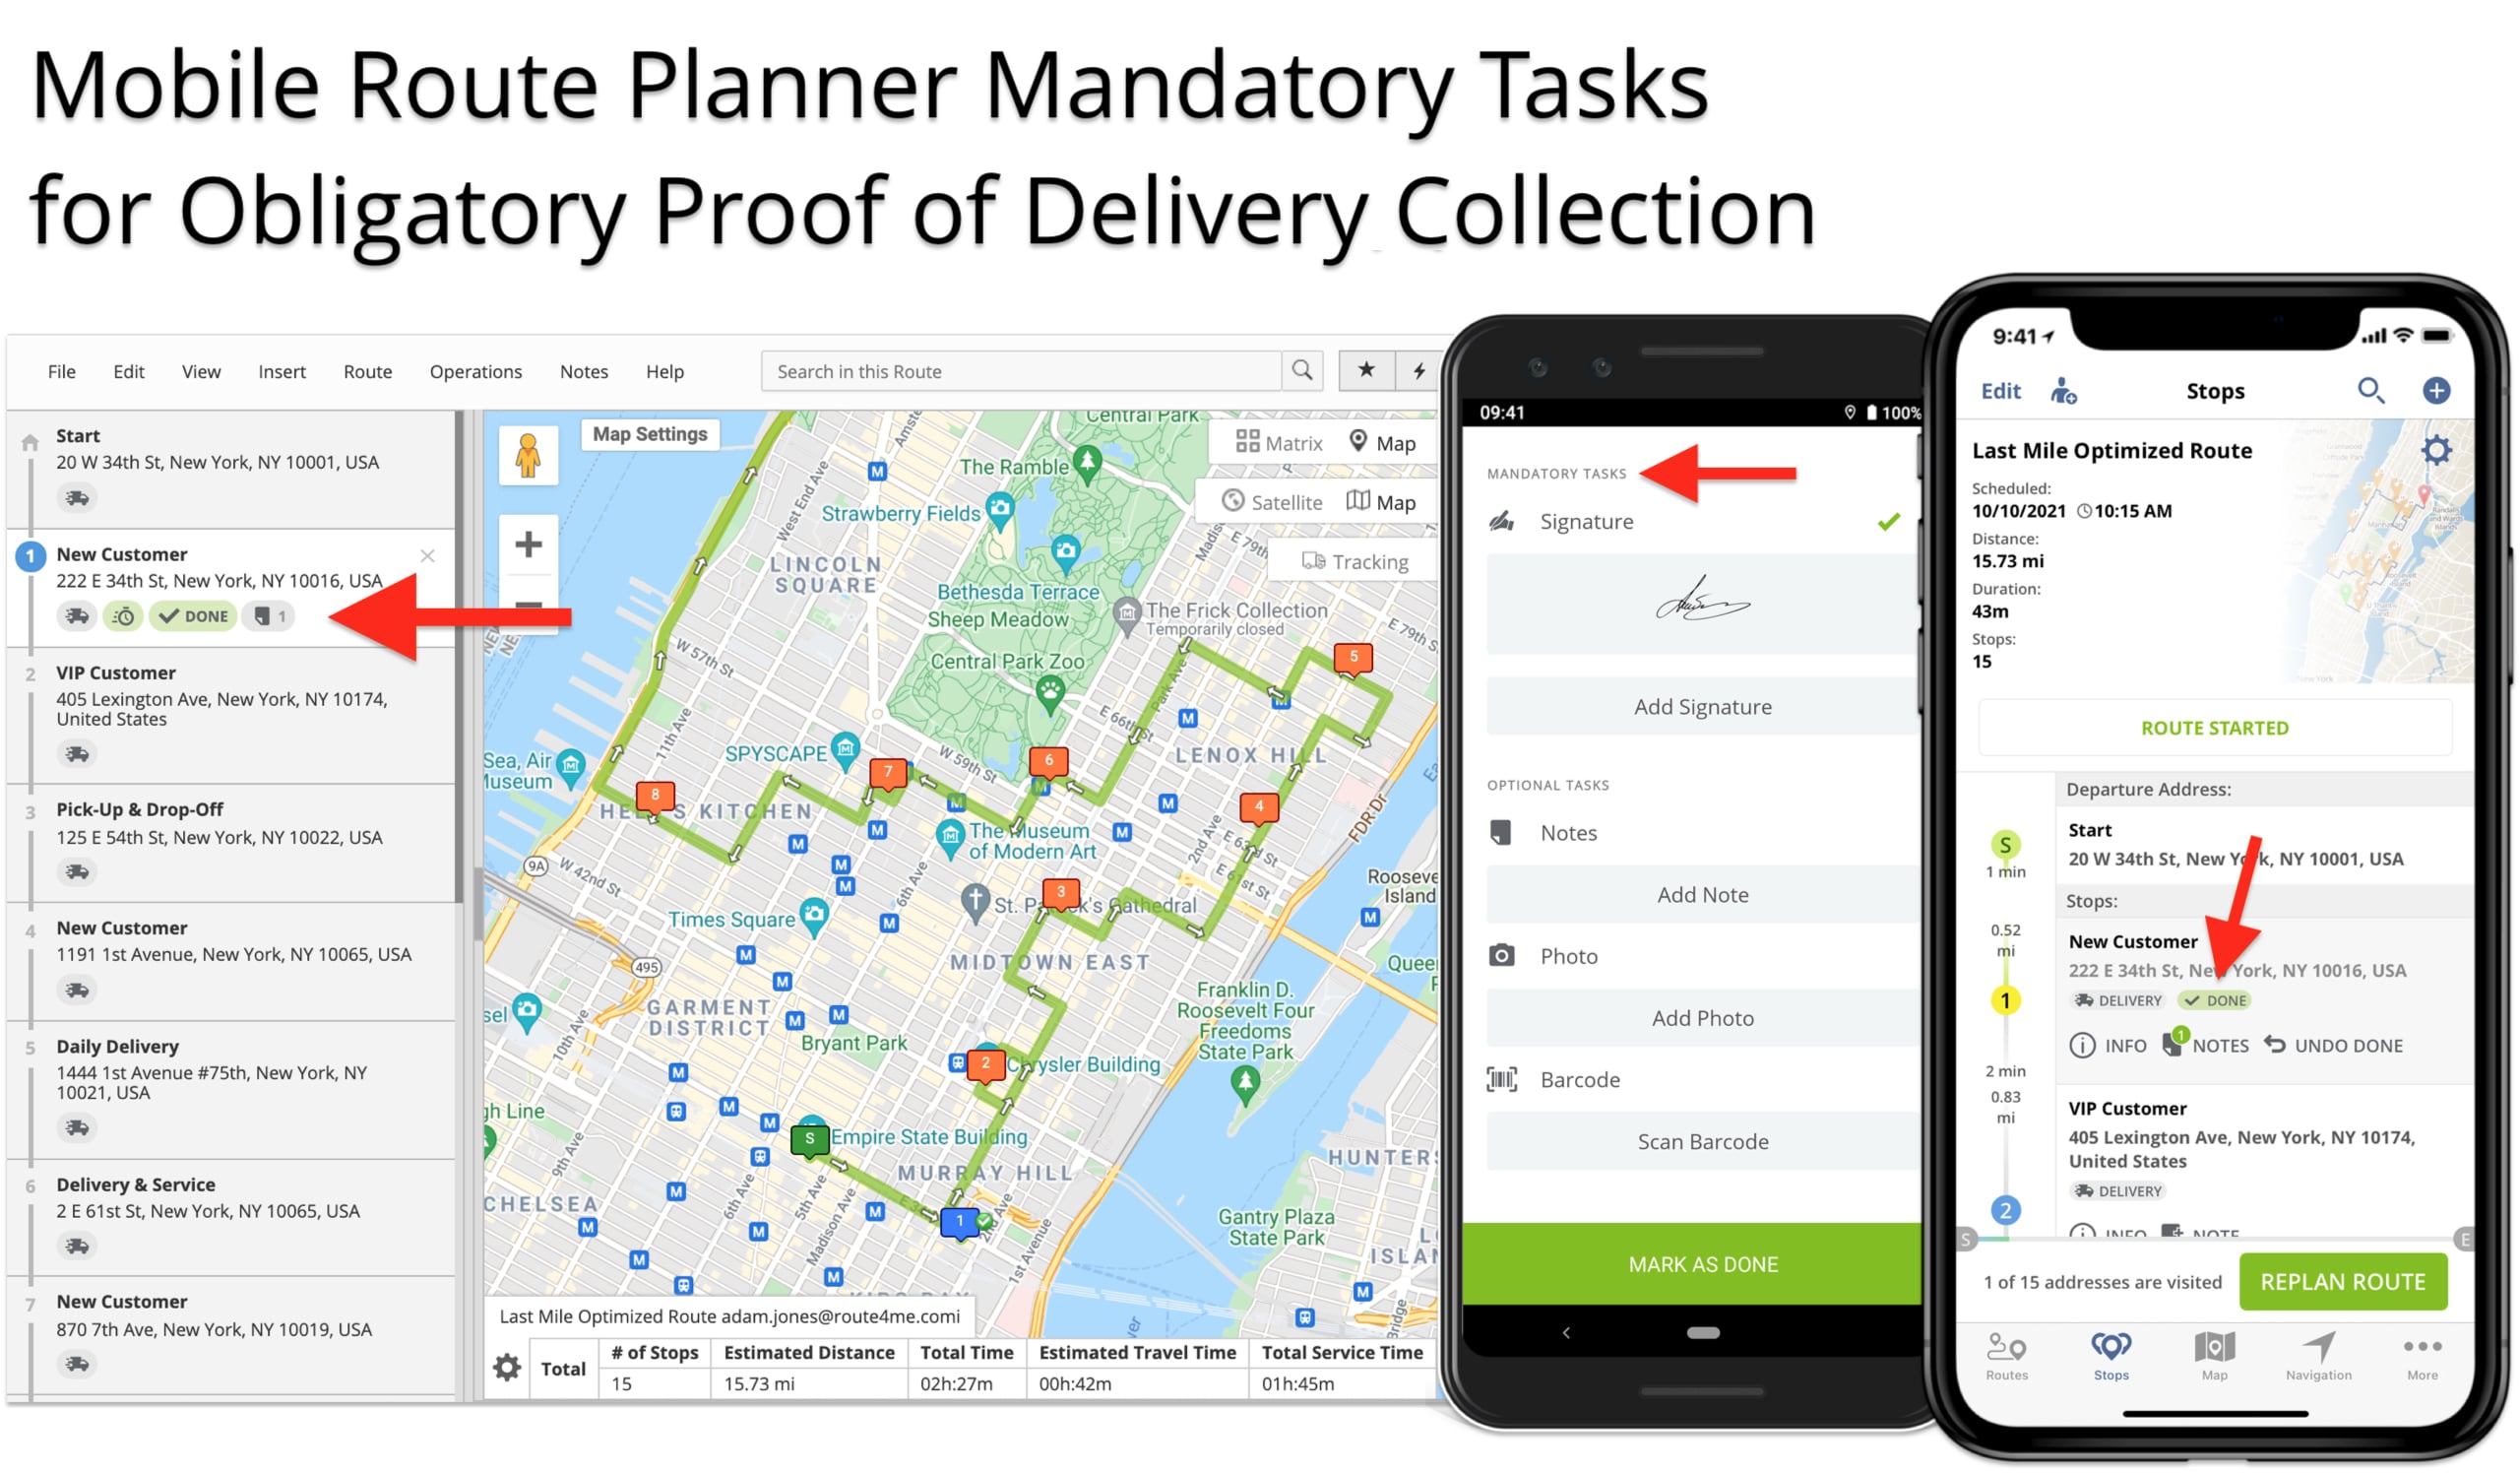 Route planner mandatory tasks on iOS and Android Route Planners for proof of delivery collection.